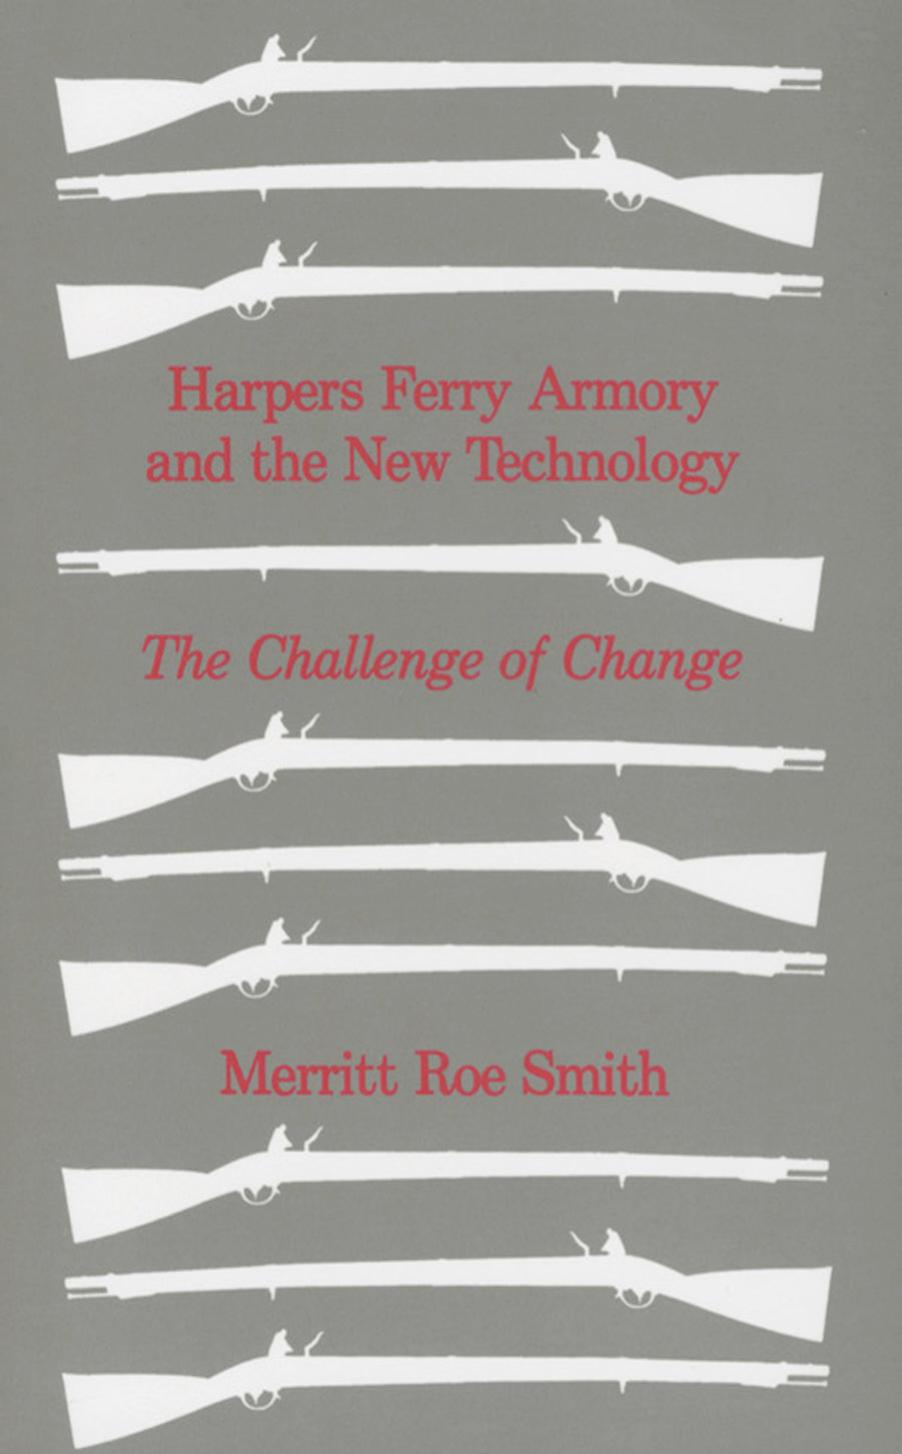 Harpers Ferry Armory and the New Technology: The Challenge of Change by Merritt Roe Smith